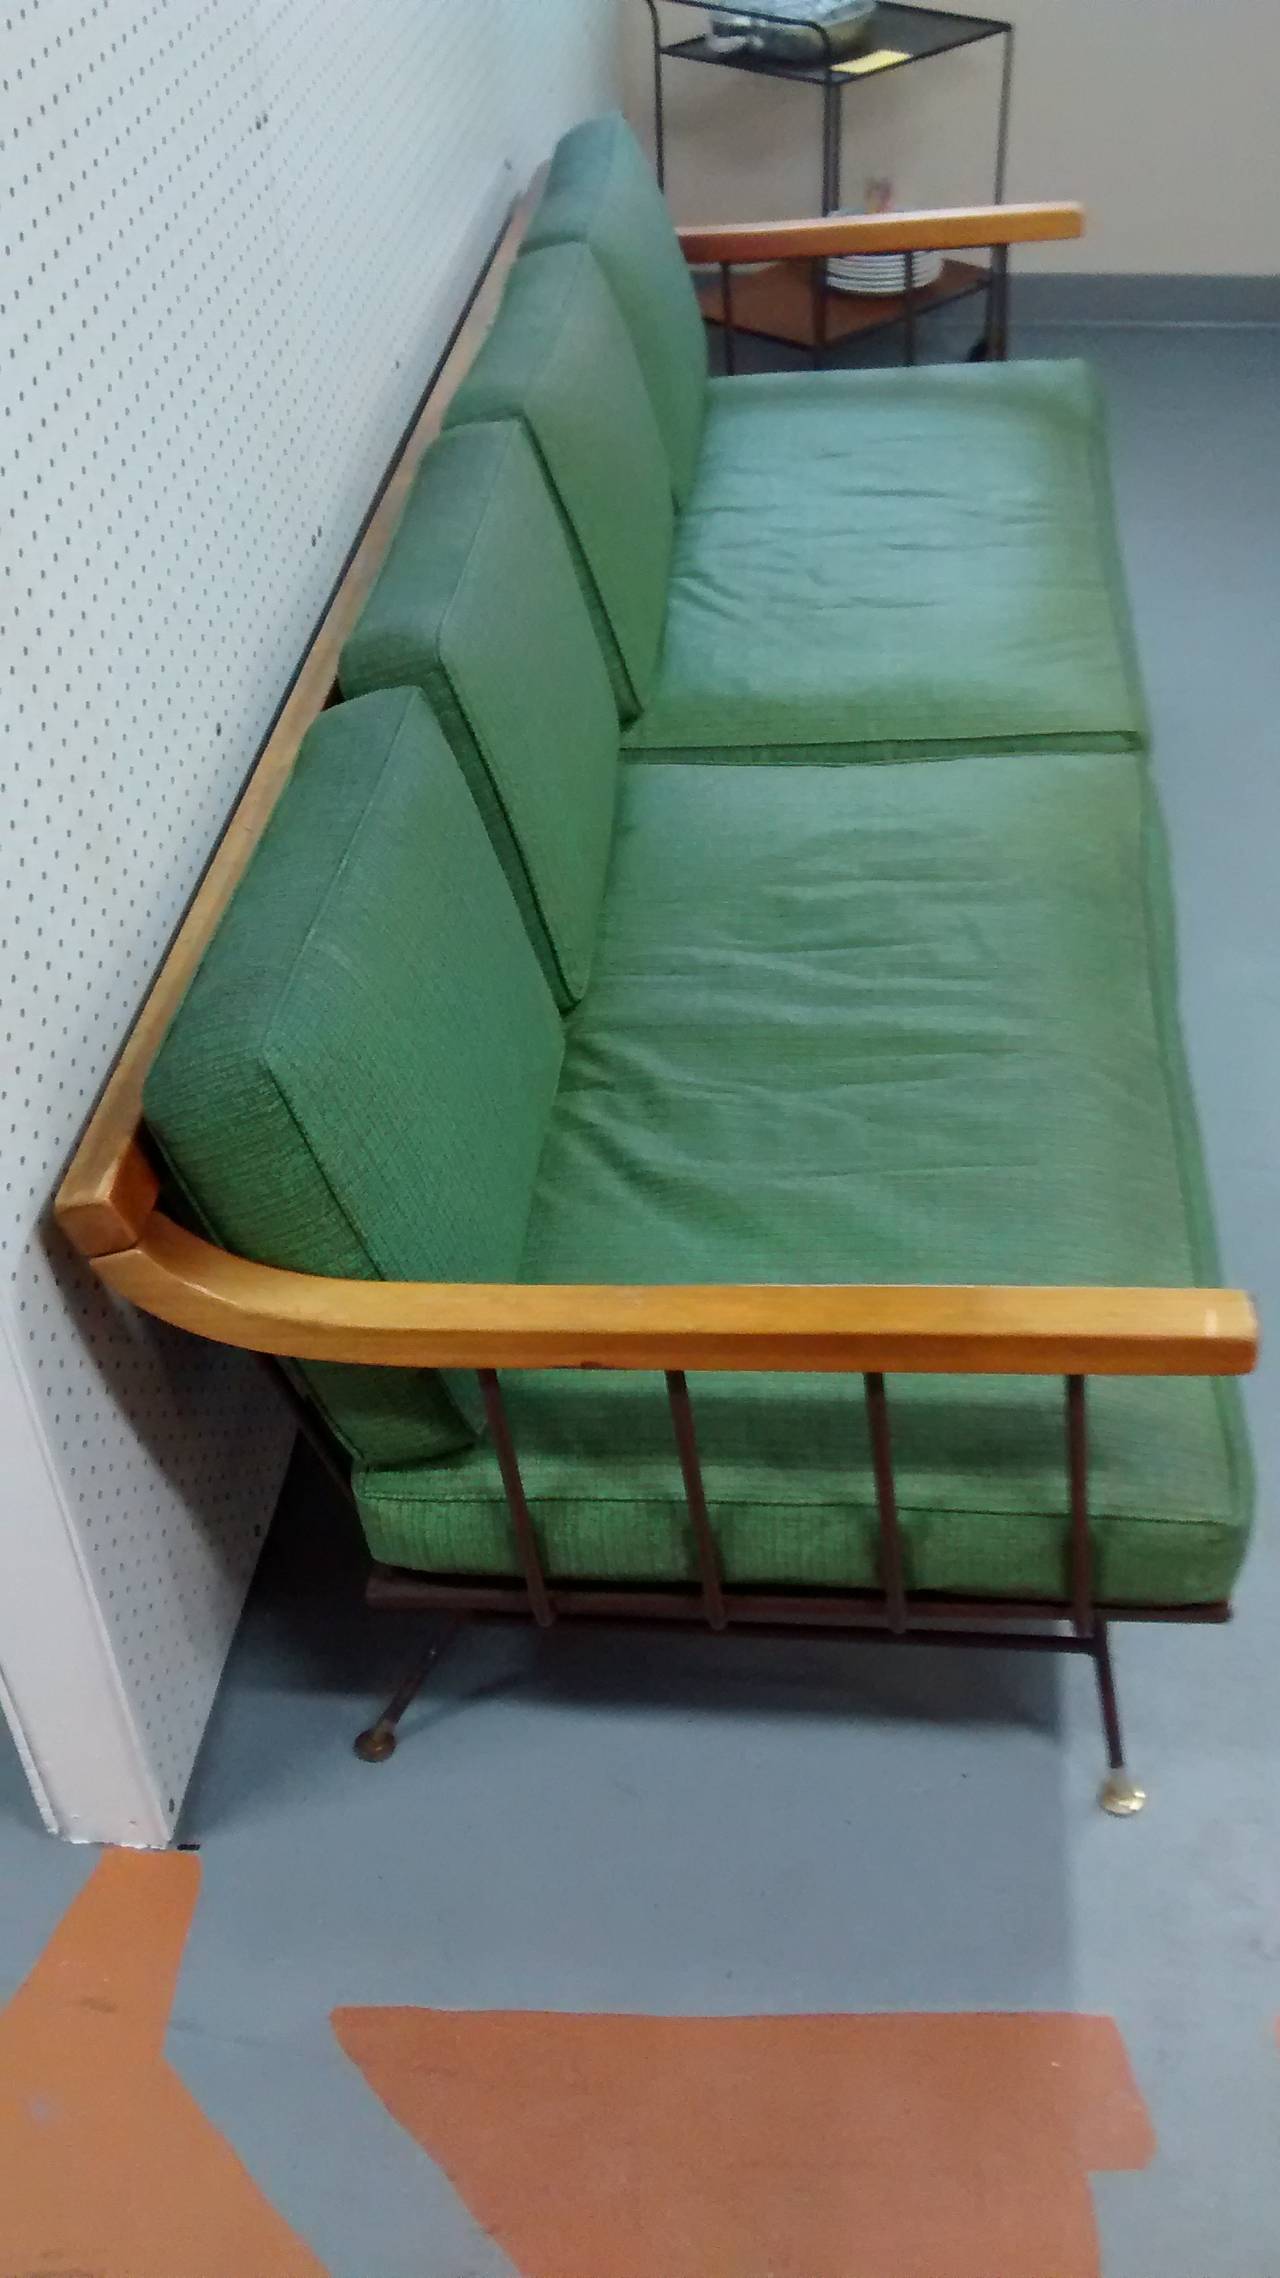 Mid-20th Century Richard McCarthy Sofa with additional pieces available separately.